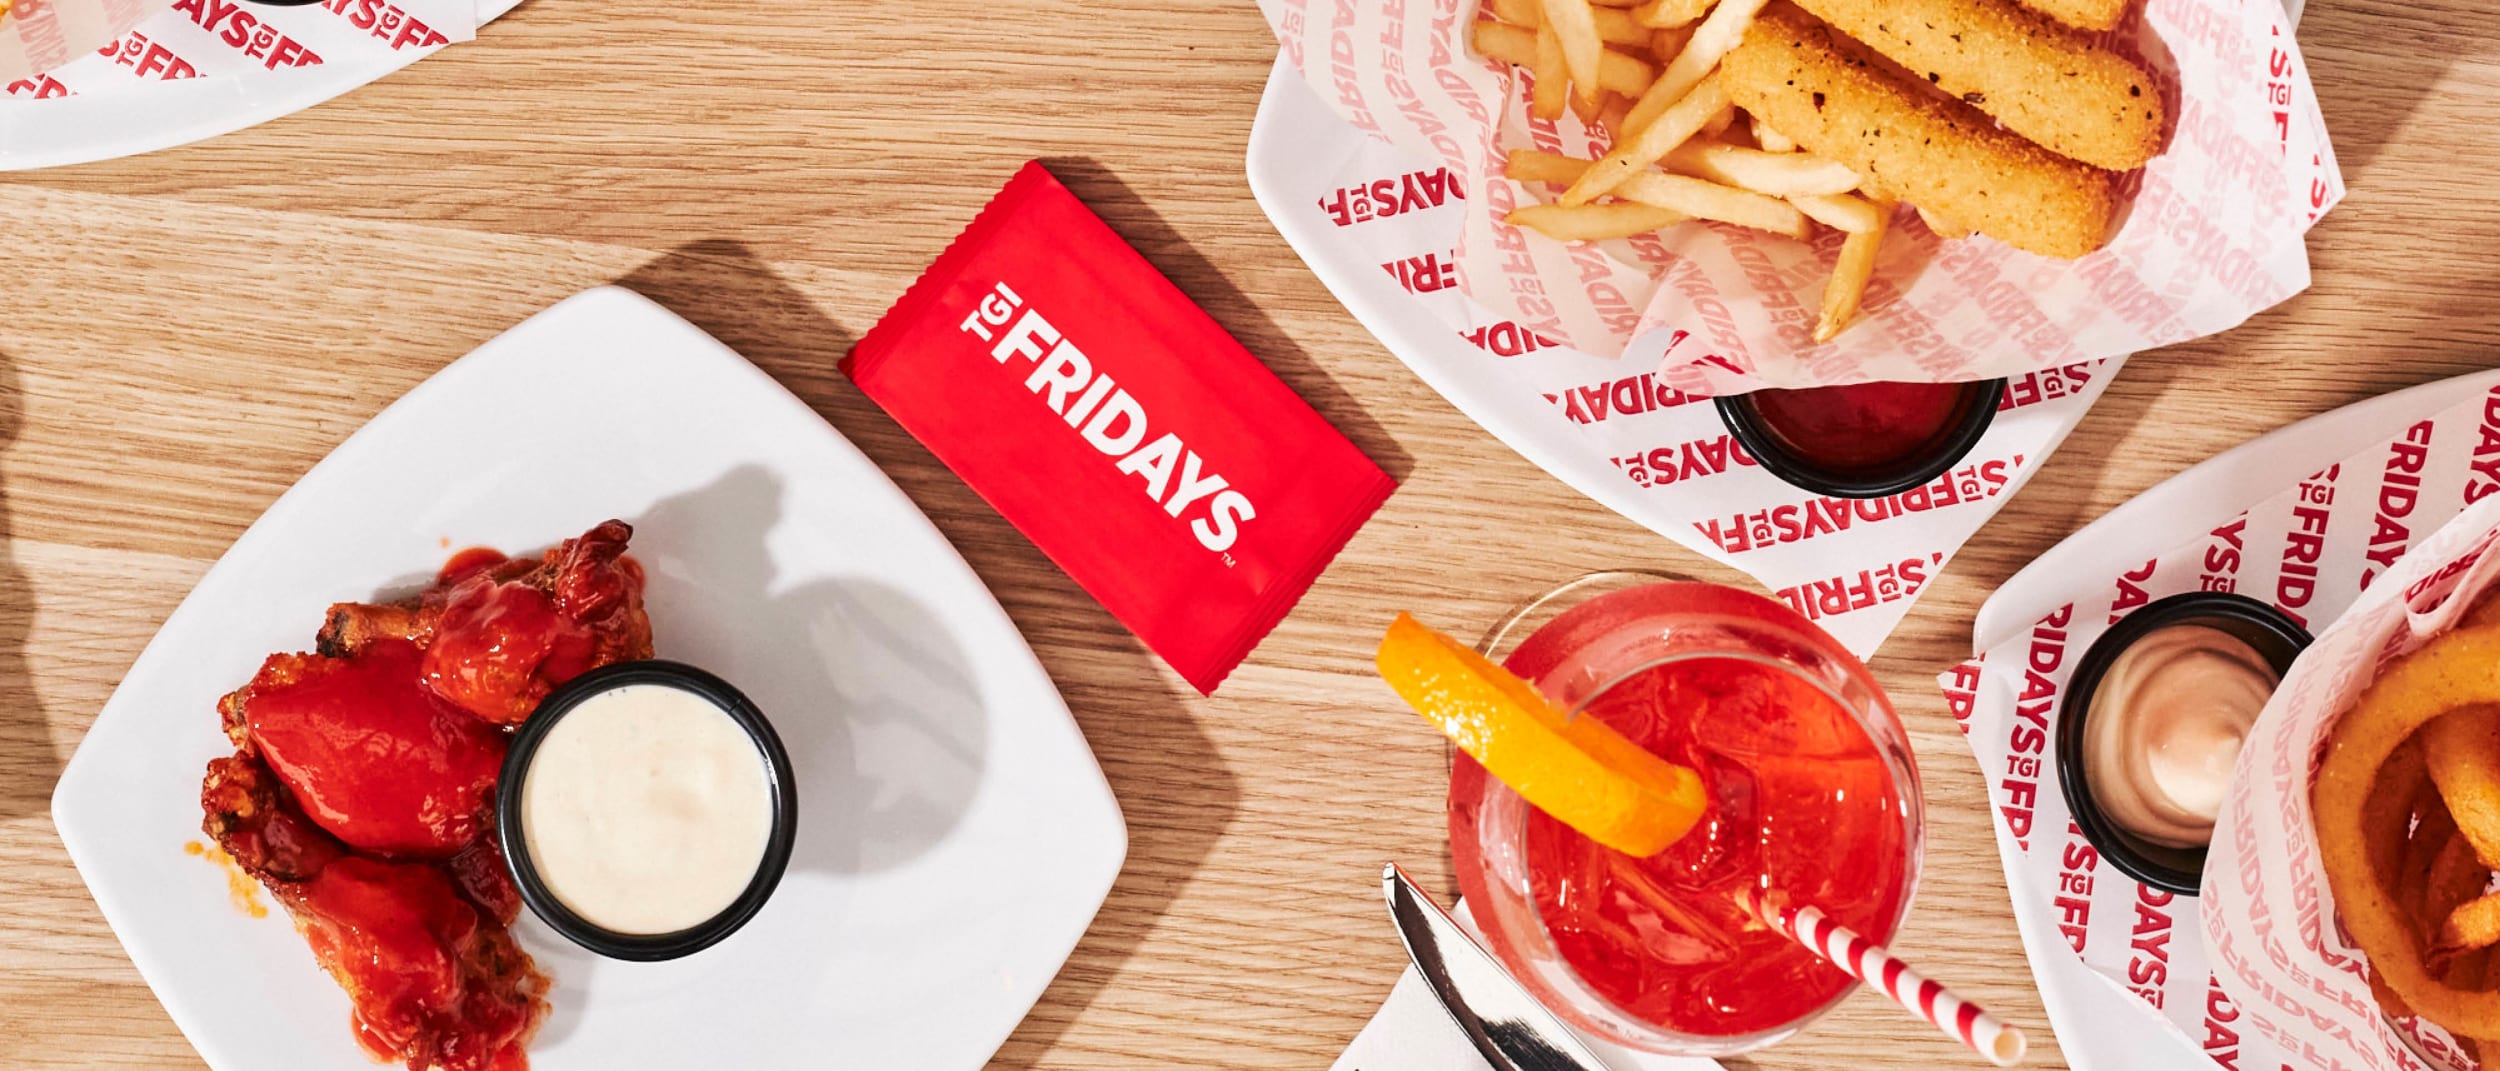 Westfield Carousel Offer TGI Fridays Happy hour 5pm 6pm